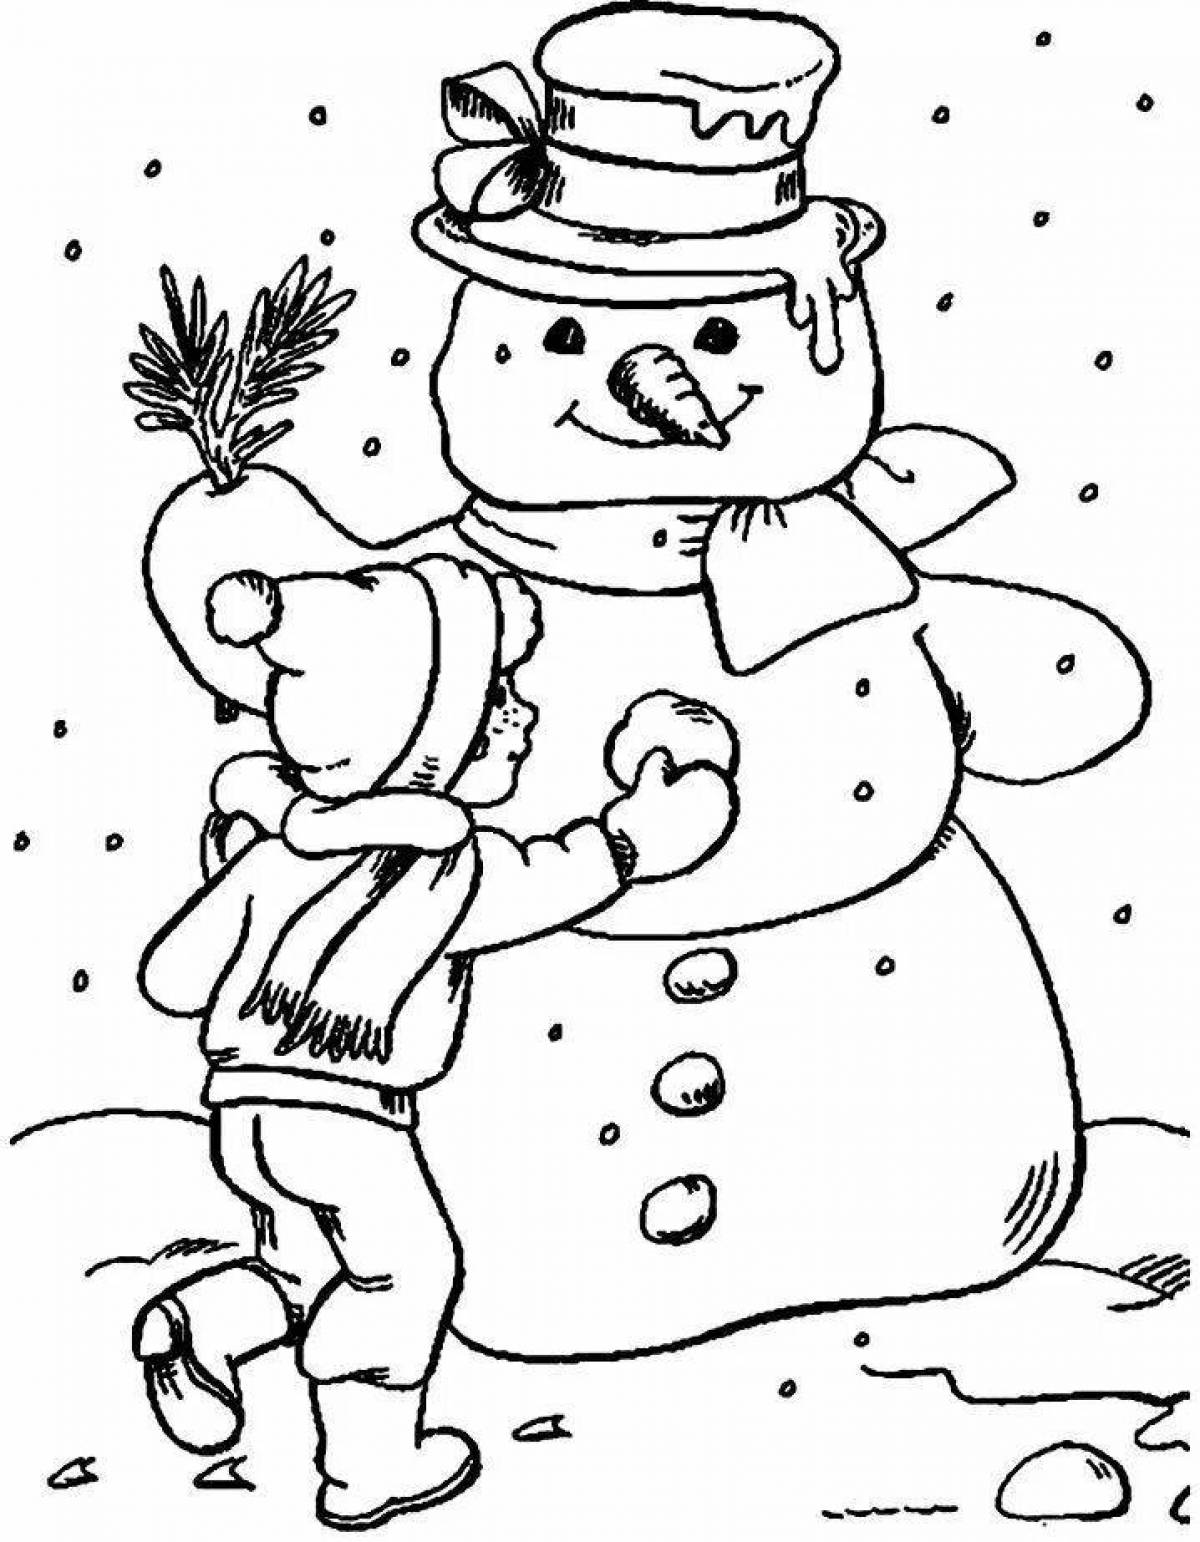 Colorful snowman coloring book